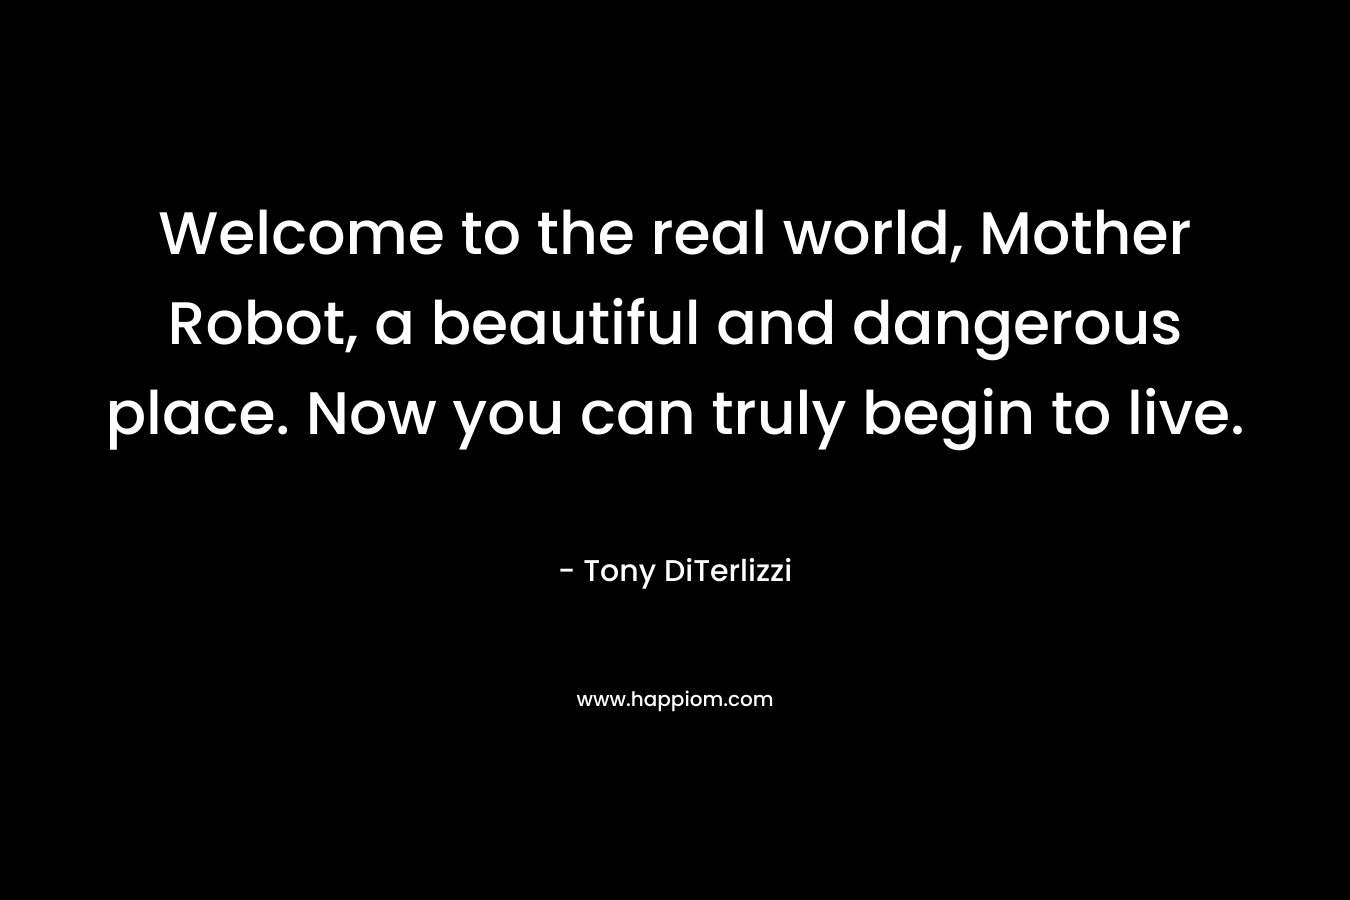 Welcome to the real world, Mother Robot, a beautiful and dangerous place. Now you can truly begin to live.